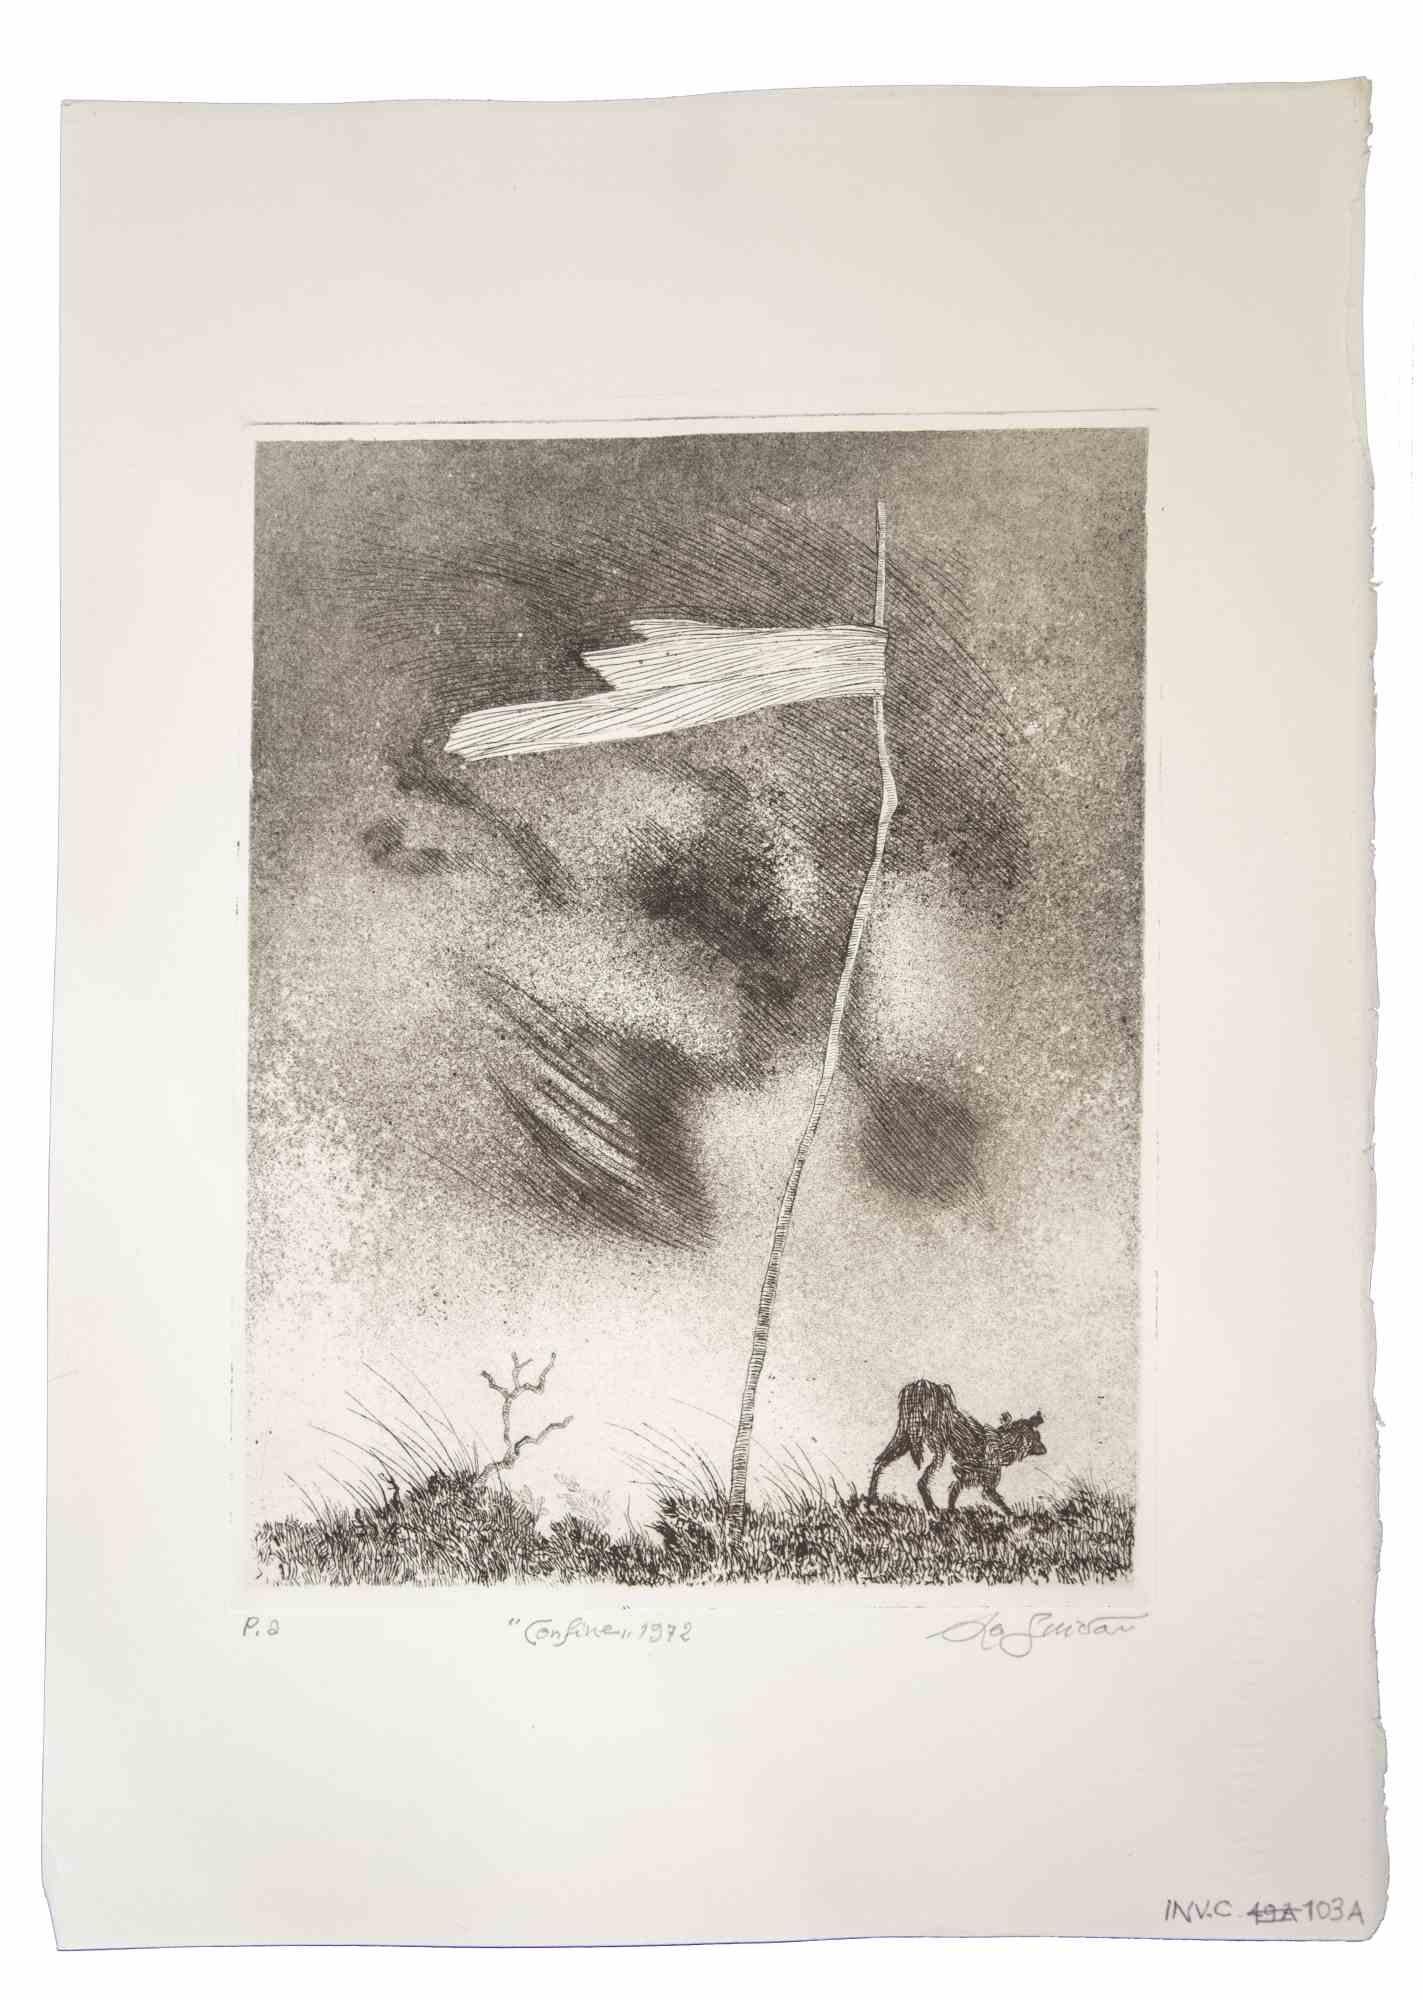 Boundary is an original etching and aquatint realized by Leo Guida in 1971.

Good condition, artist proof signed and titled.

Mounted on a white cardboard passpartout (50x34 cm).

Leo Guida  (1992 - 2017). Sensitive to current issues, artistic